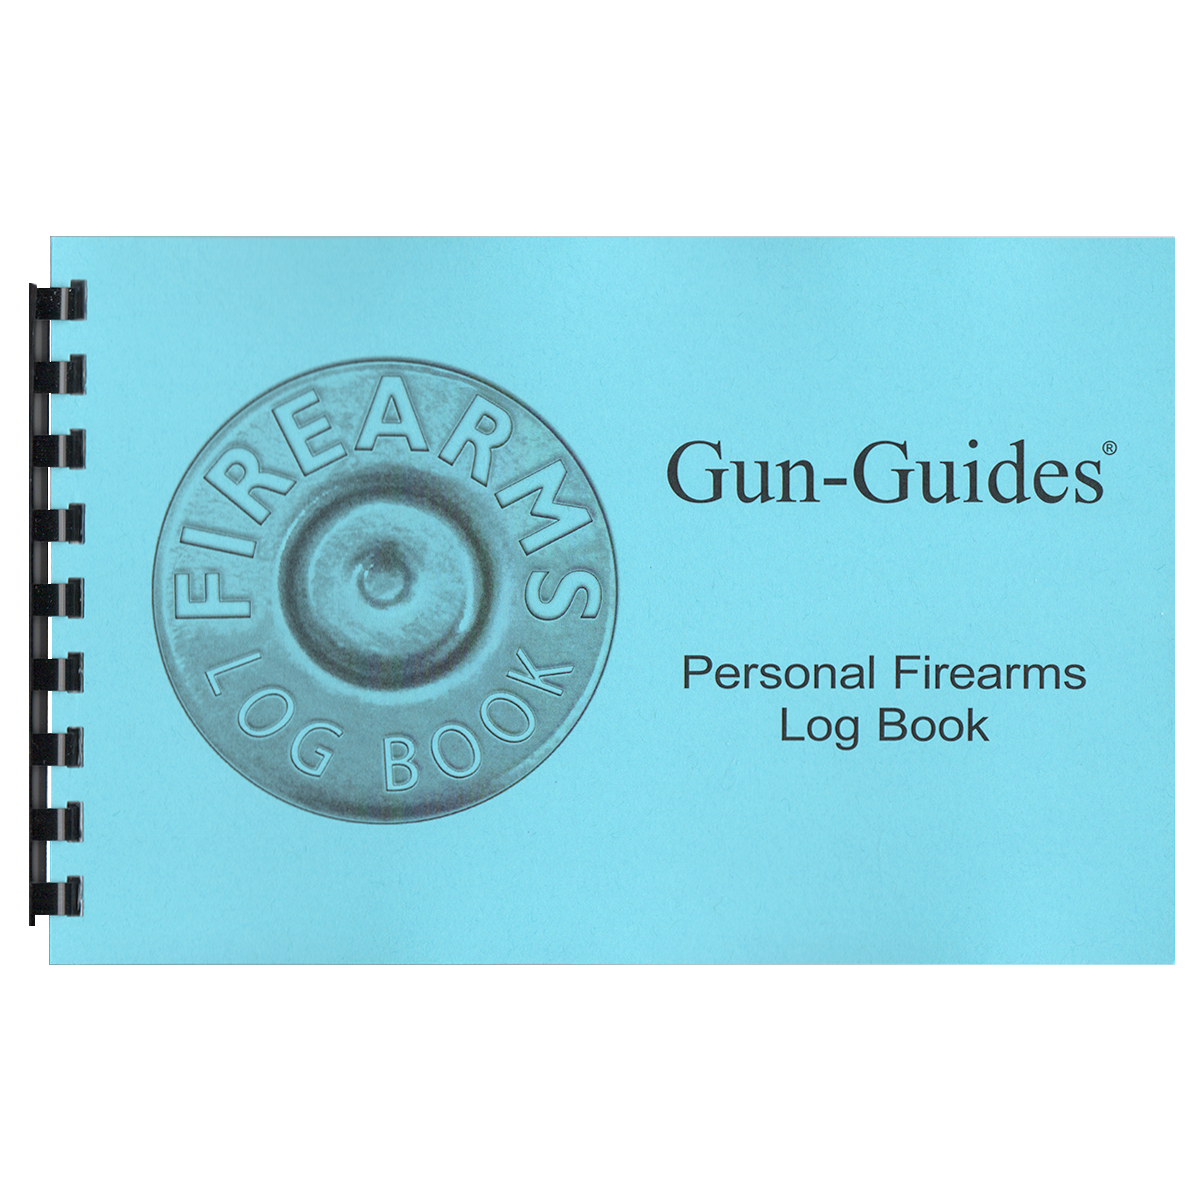 PERSONAL FIREARMS LOG BOOK (6 PACK)